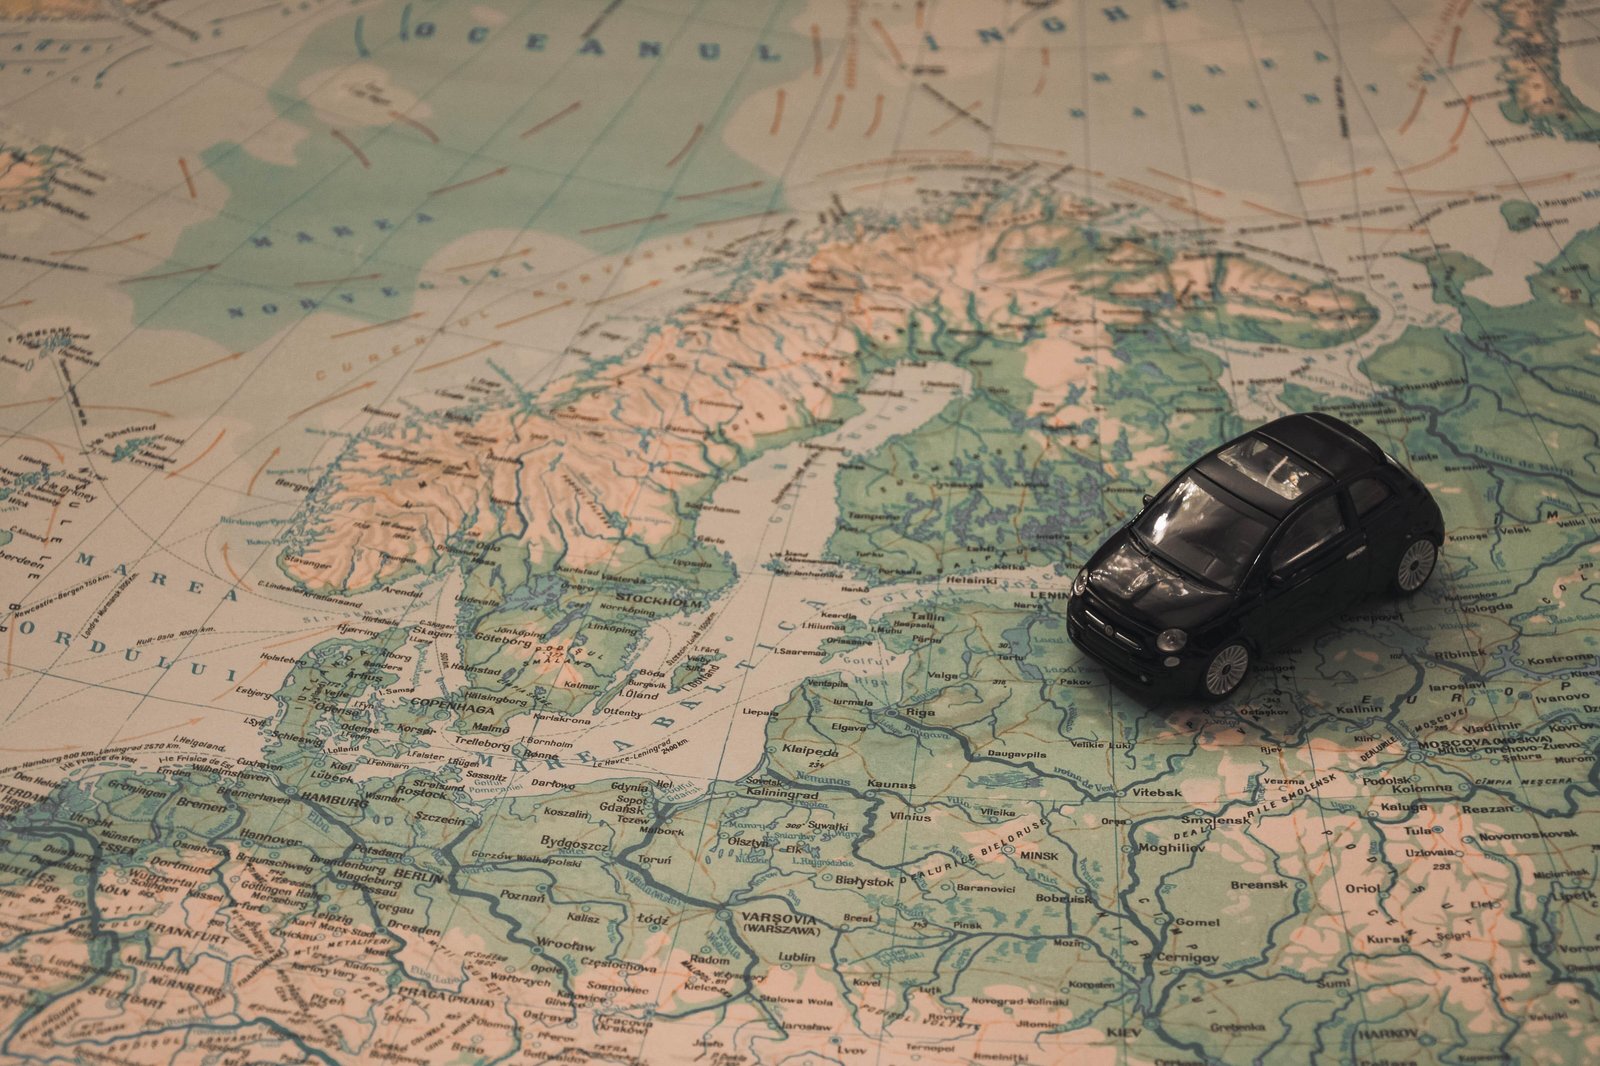 A black miniature toy car model placed on top of a detailed map of Europe.